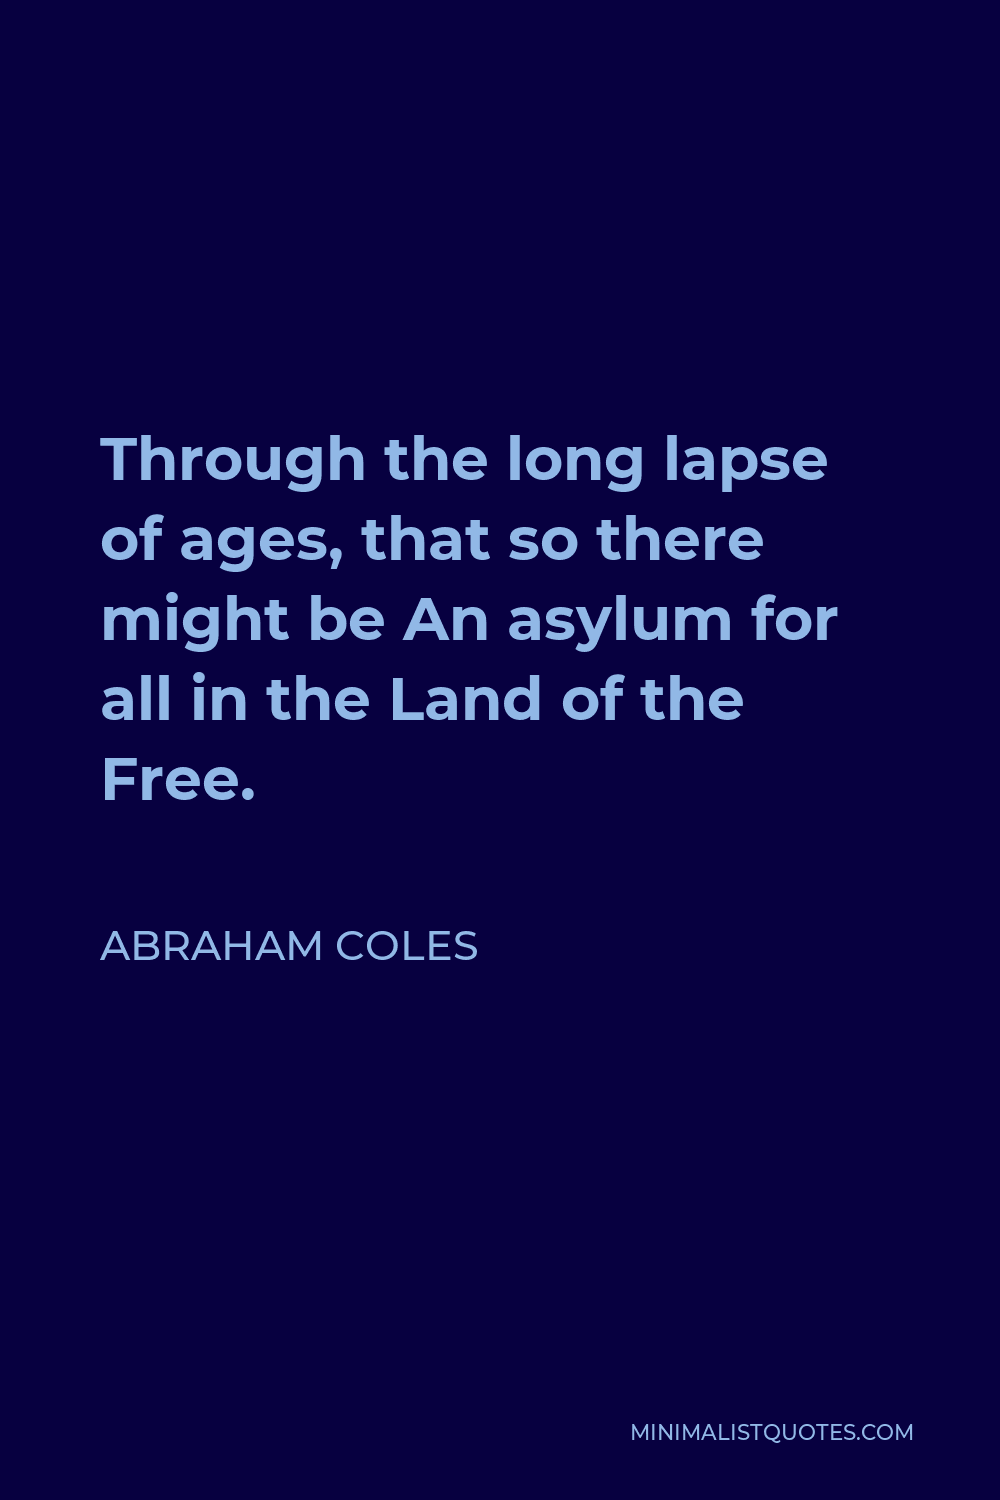 Abraham Coles Quote - Through the long lapse of ages, that so there might be An asylum for all in the Land of the Free.